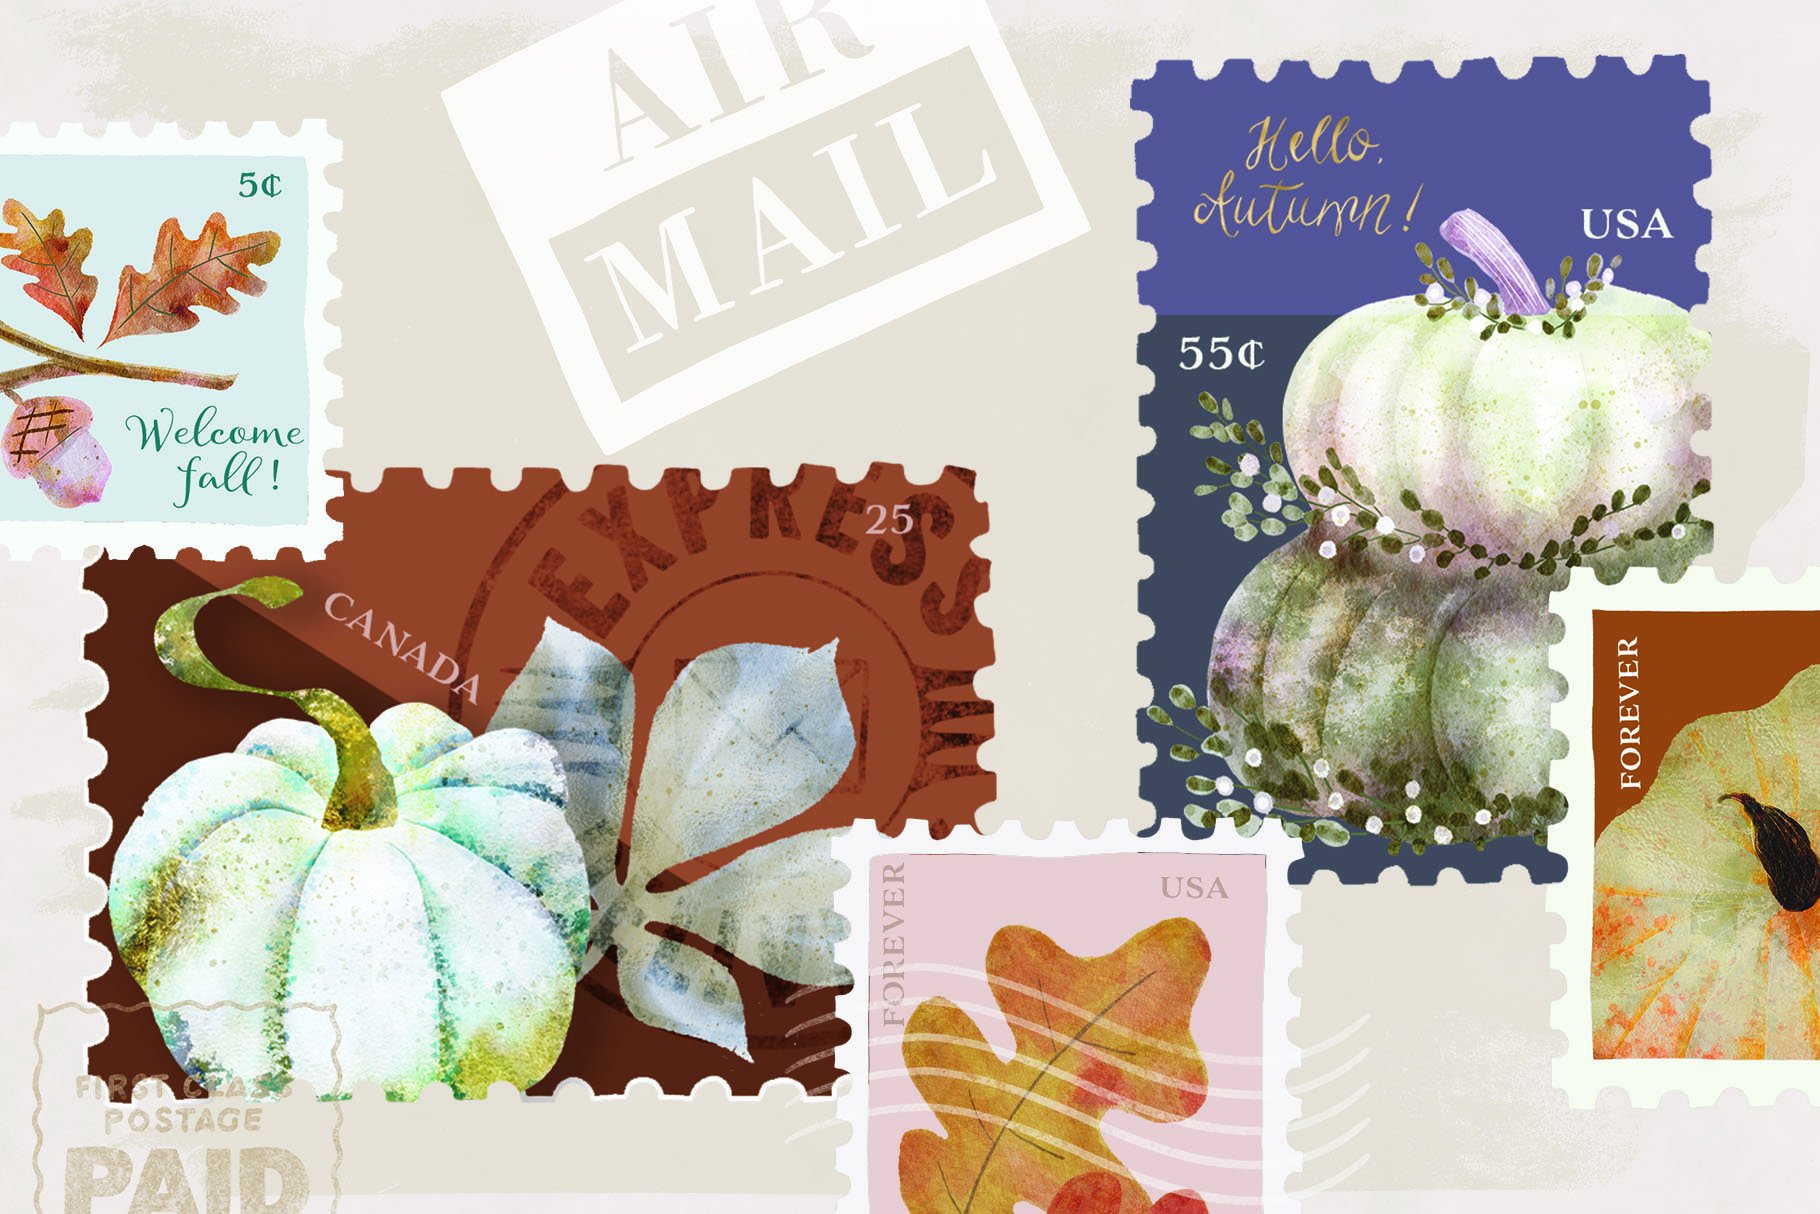 Fall greeting cards and envelope for the closest.